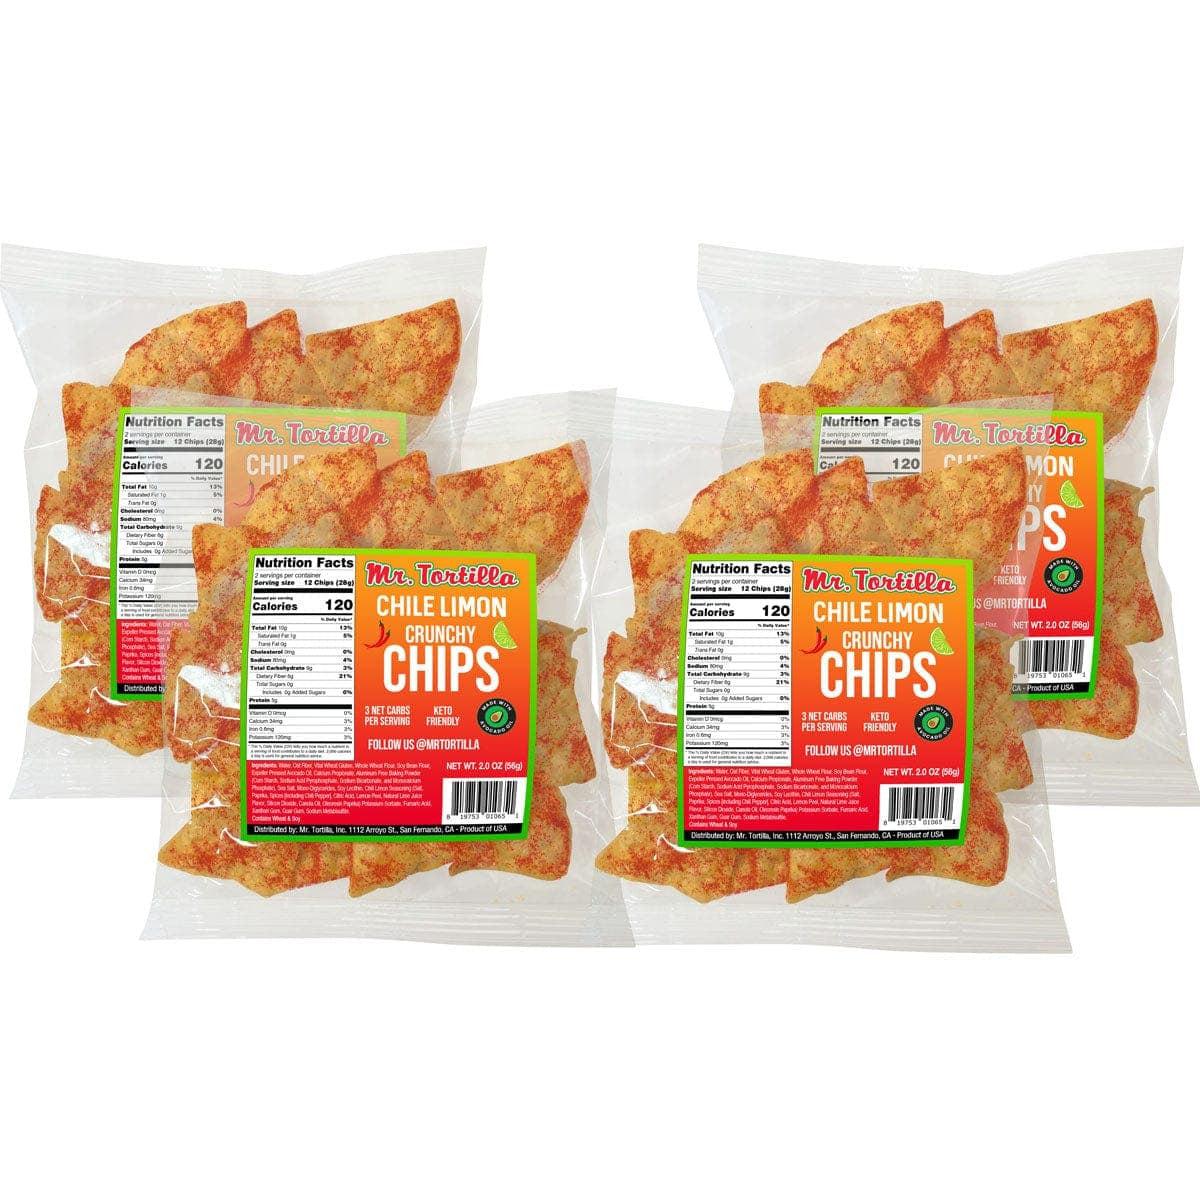 Image of Mr. Tortilla's Crunchy Chips - Chile Limón